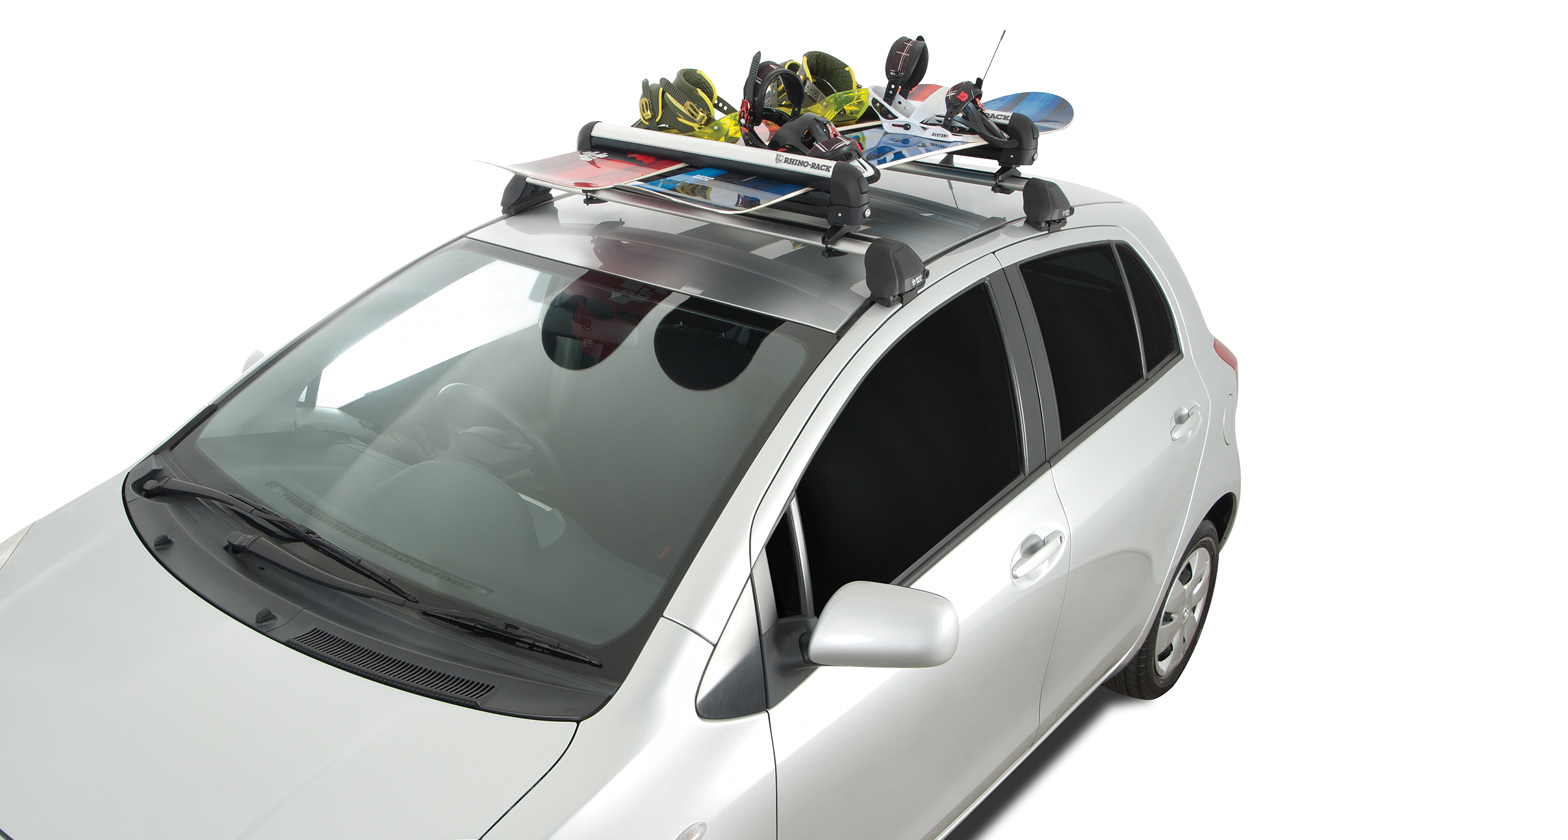 Roof Rack Accessories for Water Sports and Fishing — S-Cargo Truck